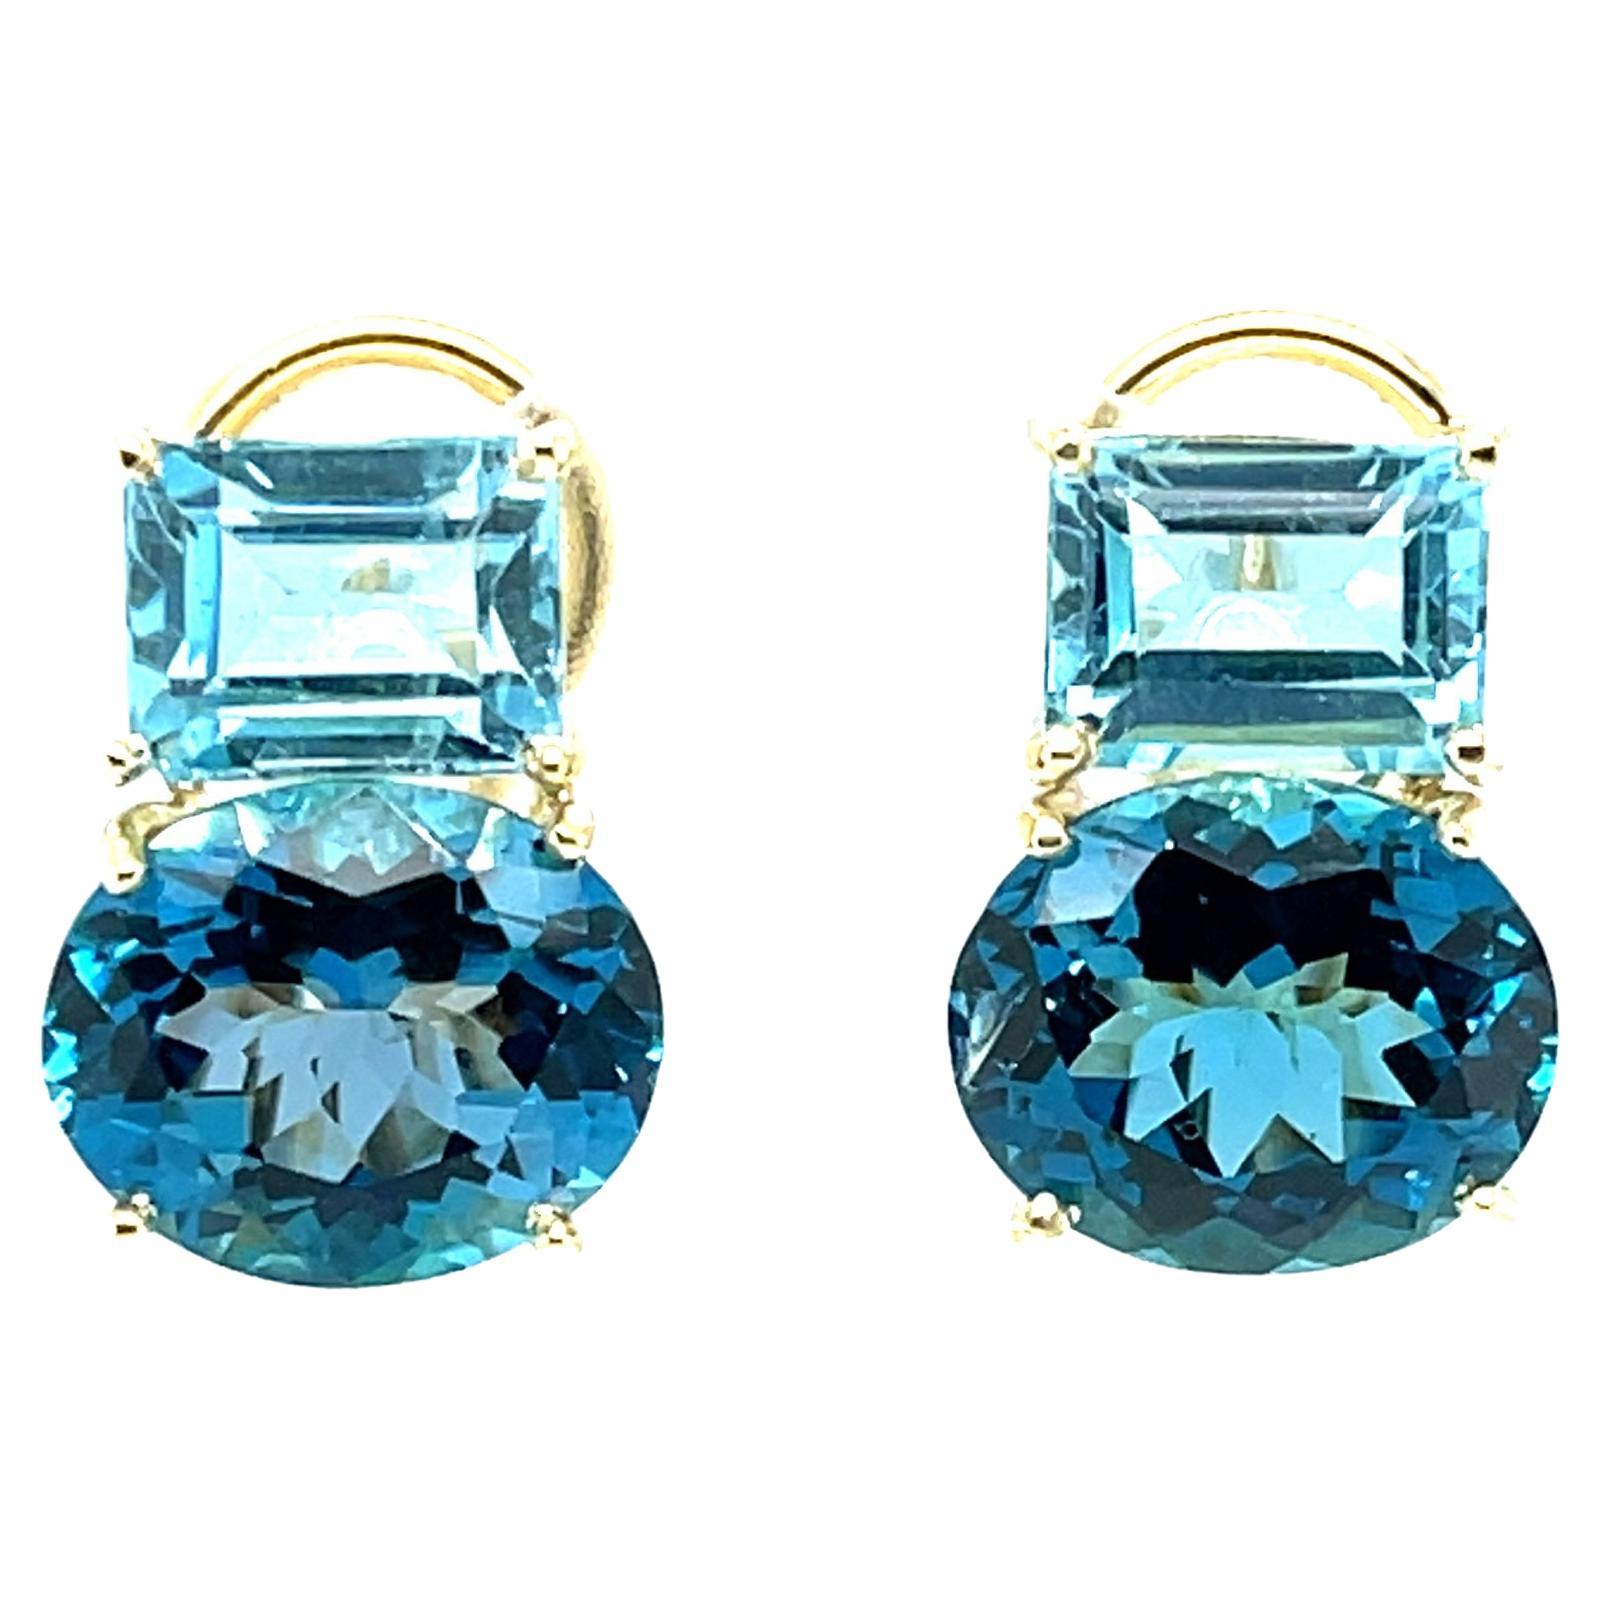 Swiss and Sky Blue Topaz Earrings in 18k Yellow Gold with French Clips